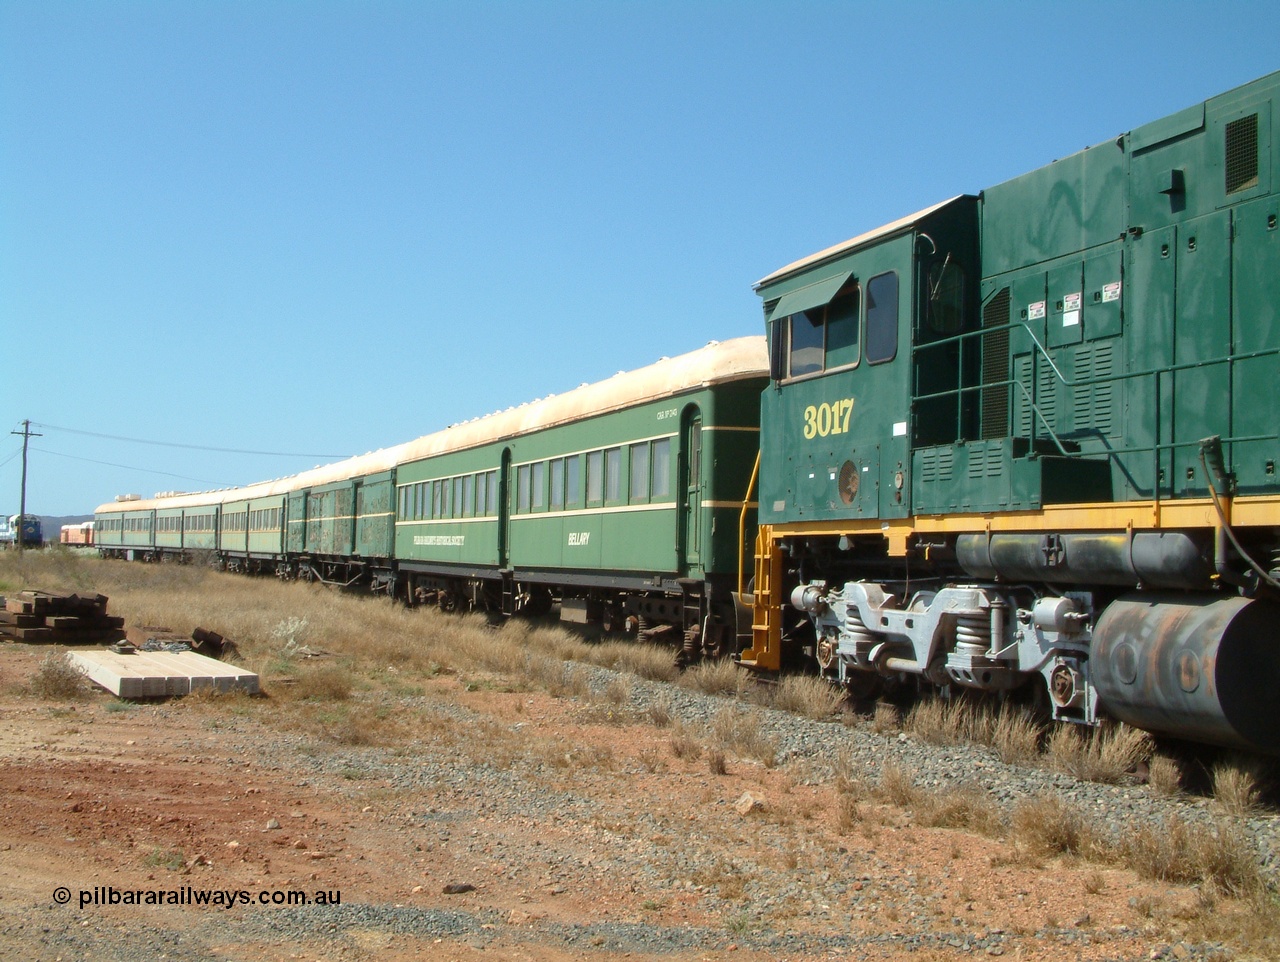 041014 142329
Pilbara Railways Historical Society, view along the passenger carriages behind rebuilt ALCo C636R locomotive 3017 with the first passenger carriage 'Bellary' was originally built by Clyde Engineering at Granville NSW in 1936 for the NSWGR as a second class railway carriage FS type FS 2143. In 1987 it was purchased by the Society and is named after a local river. The next carriage is van 'Portland' and originally an NSWGR MHO type guards van MHO 2321, then recoded to KB type mail van, then to KBY 2513 guards van. For a view 20 years later [url=https://pilbararailways.com.au/gallery/displayimage.php?pid=17751]click here[/url]. 14th October 2004.
Keywords: 3017;Comeng-WA;ALCo;C636R;WA-135-C-6043-04;rebuild;